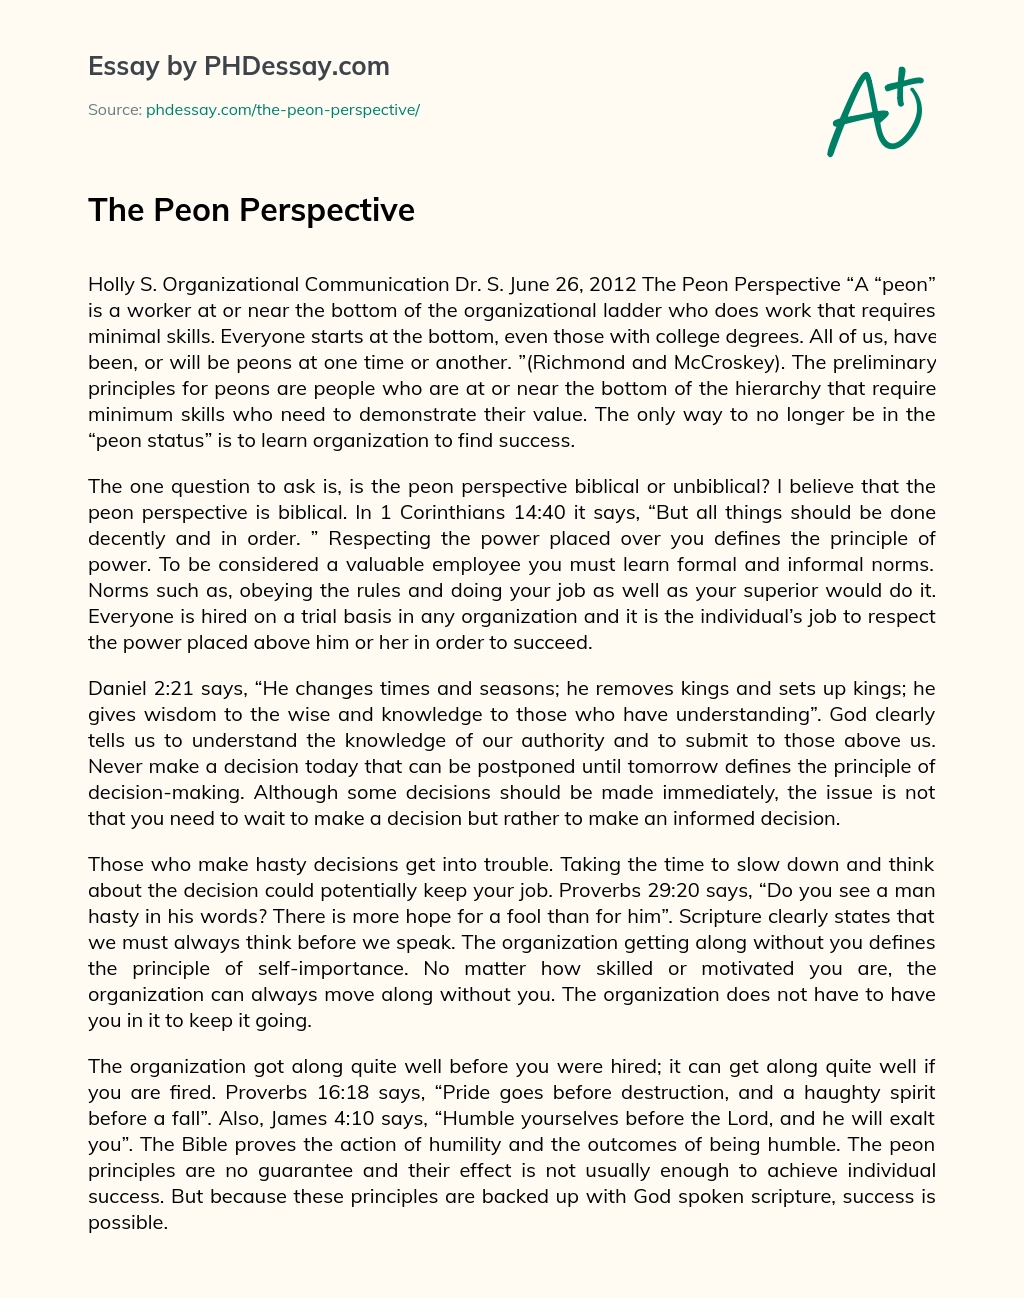 The Peon Perspective essay